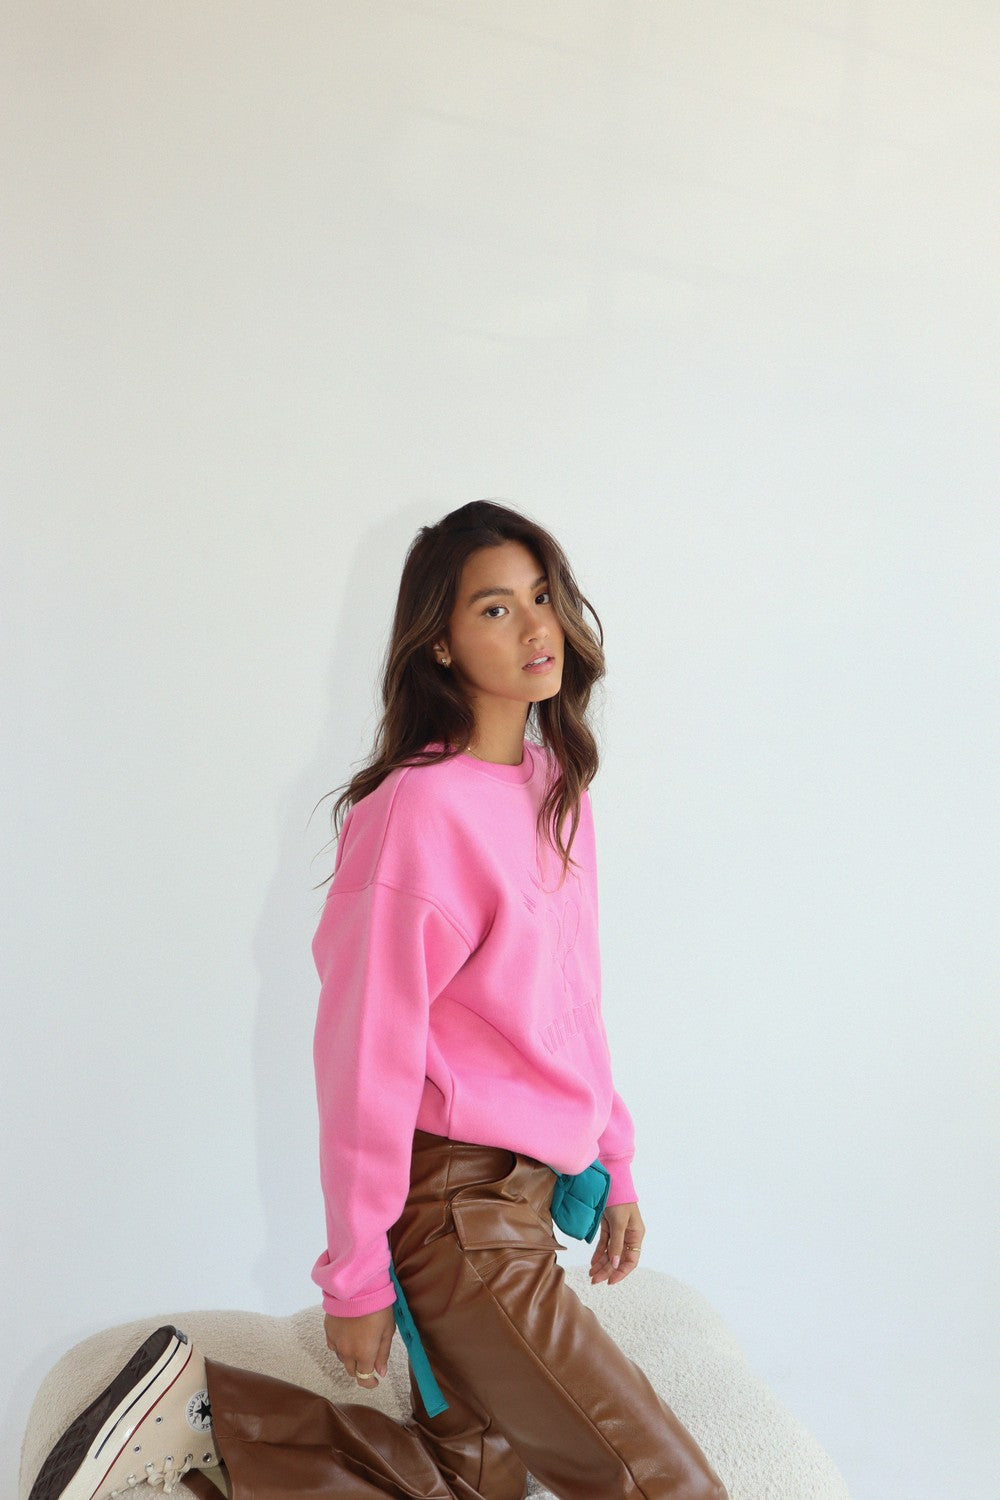 Oversized fleece-lined crewneck sweatshirt in pink.  Embroidered on the front with "Malibu Athletics" and rackets.  Side view.